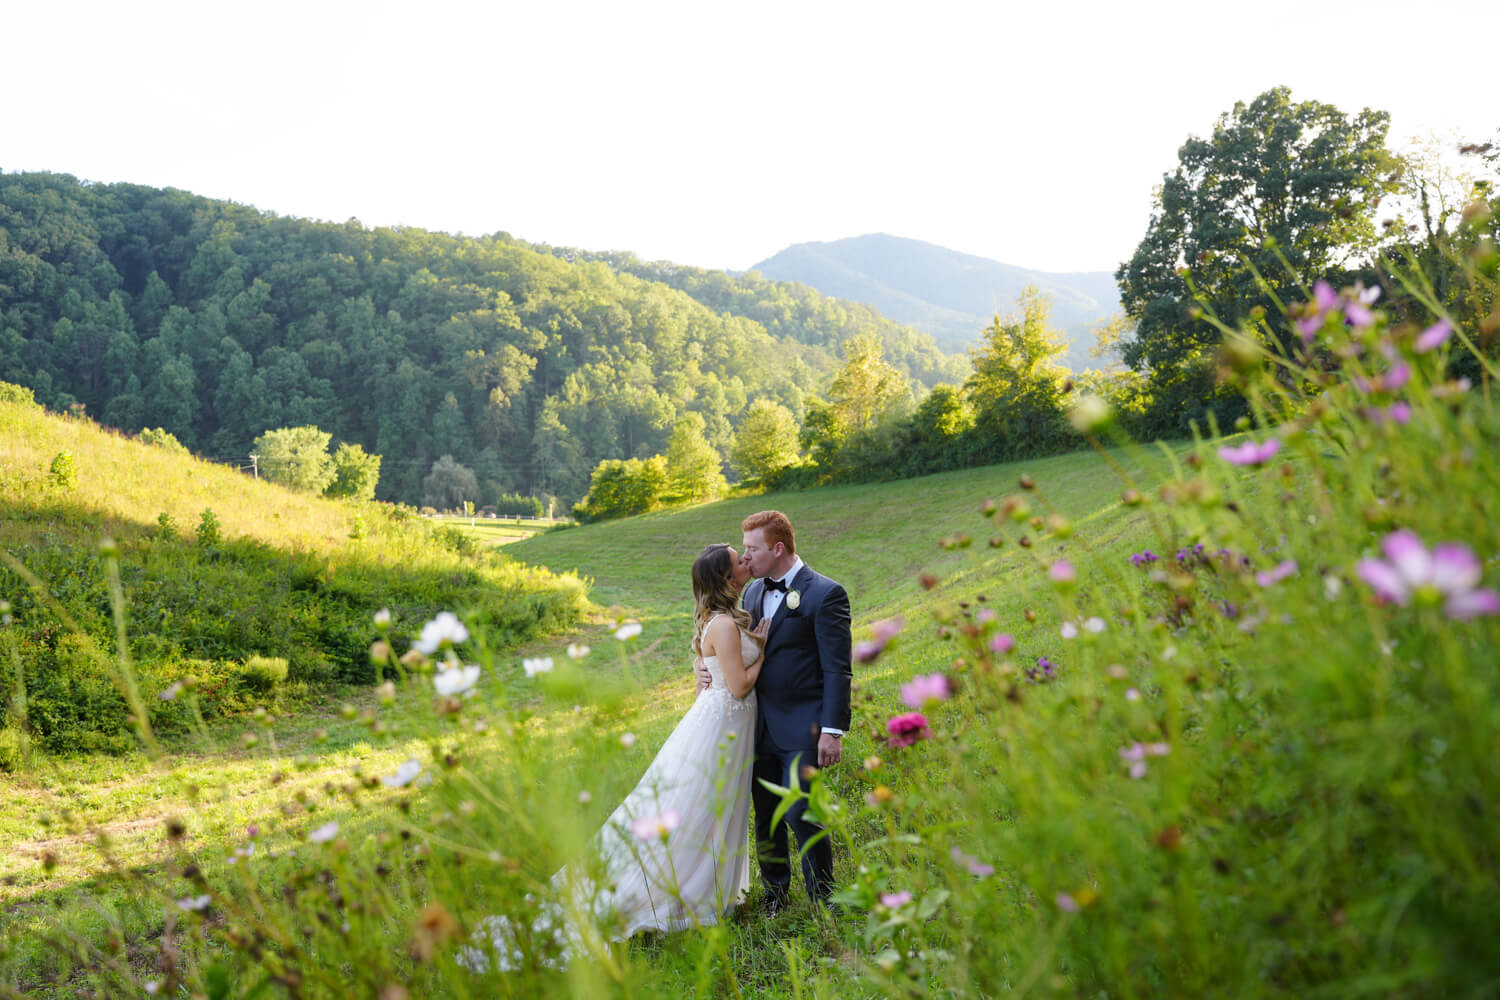 Wedding couple kissing in a field with wildflowers and a mountain view at Honeysuckle Hills in Pigeon Forge Tennessee